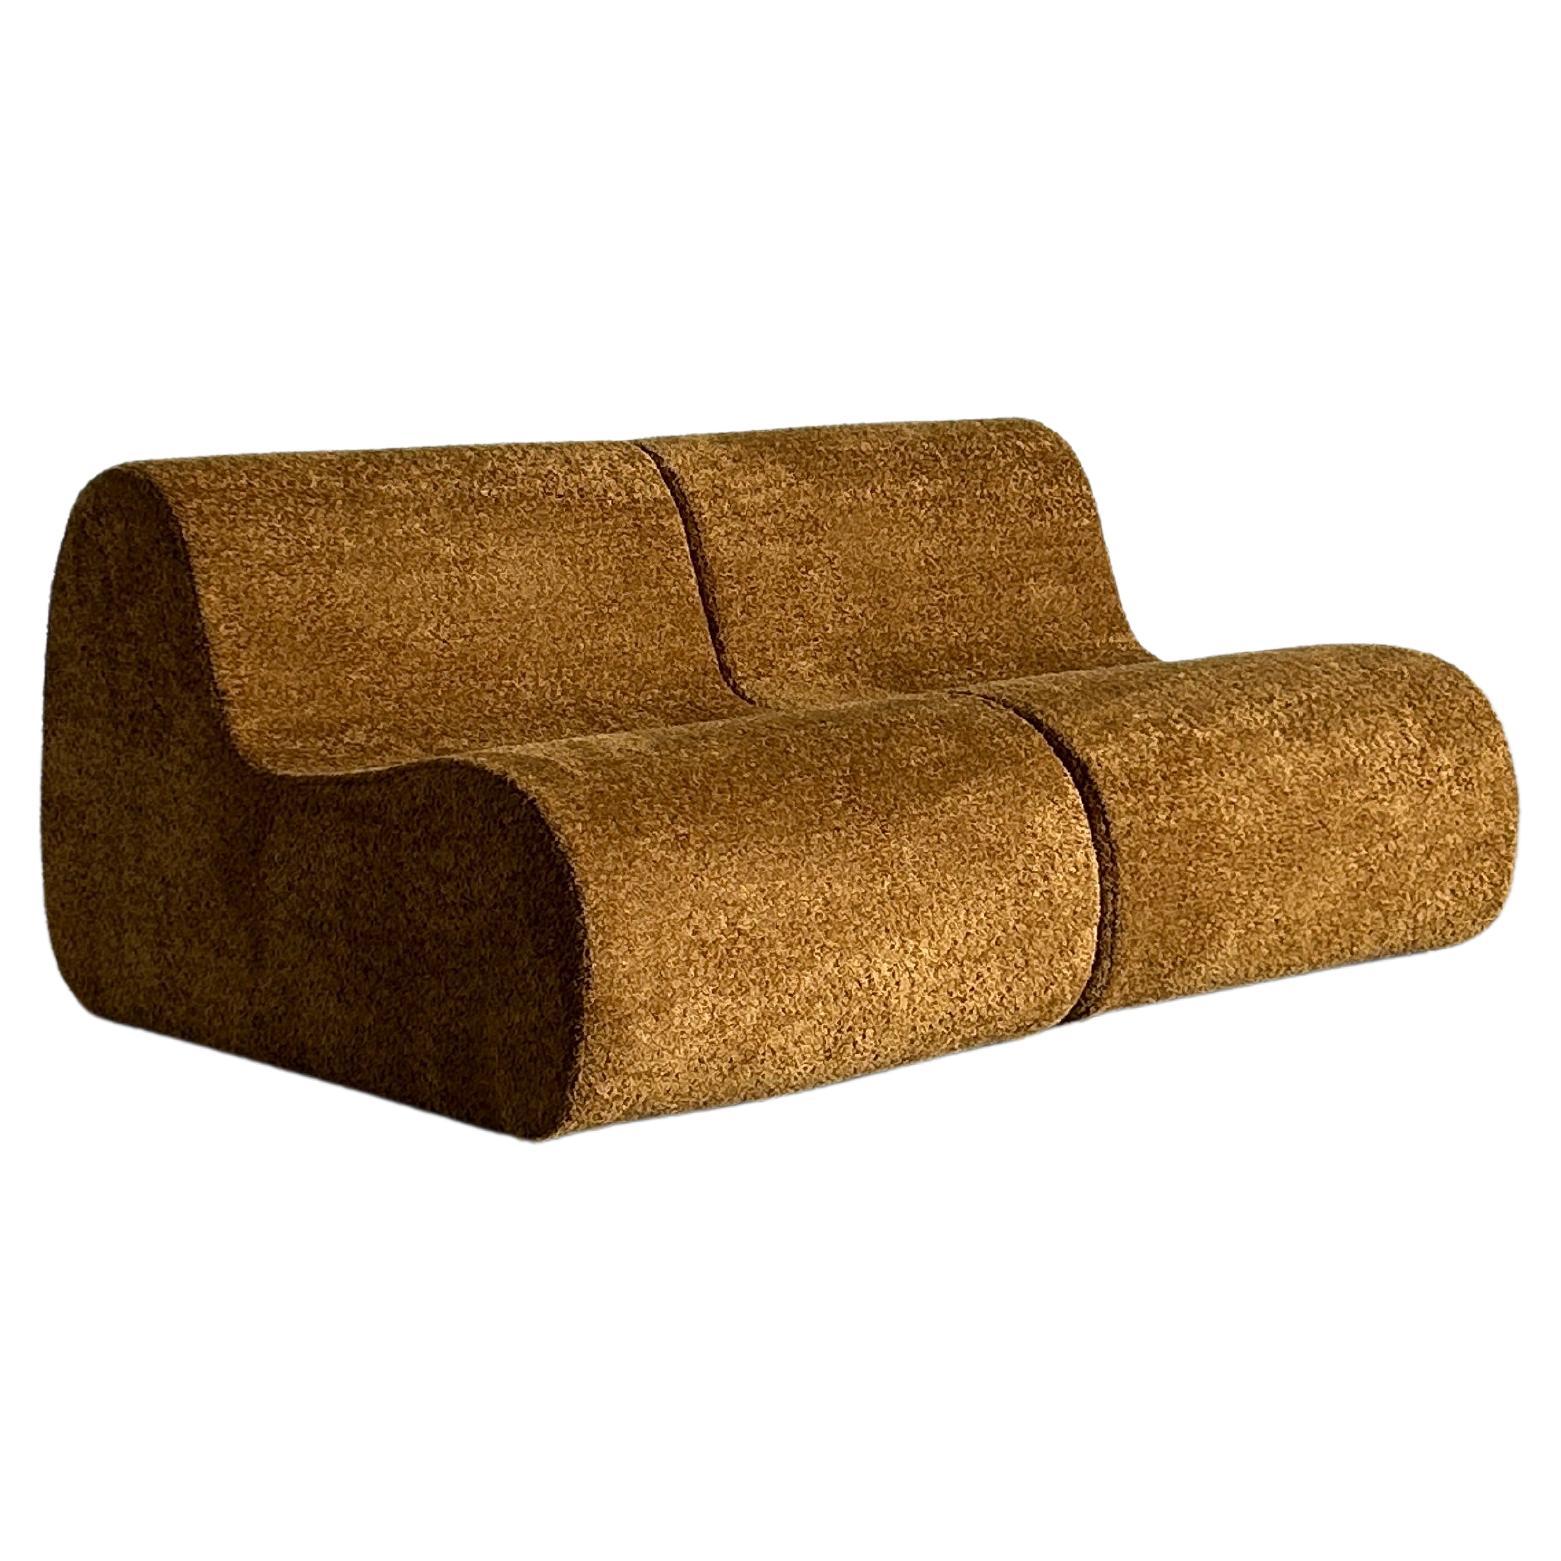 Pair of Italian Mid-Century-Modern Lounge Chairs in Ochre Boucle, 1970s Italy